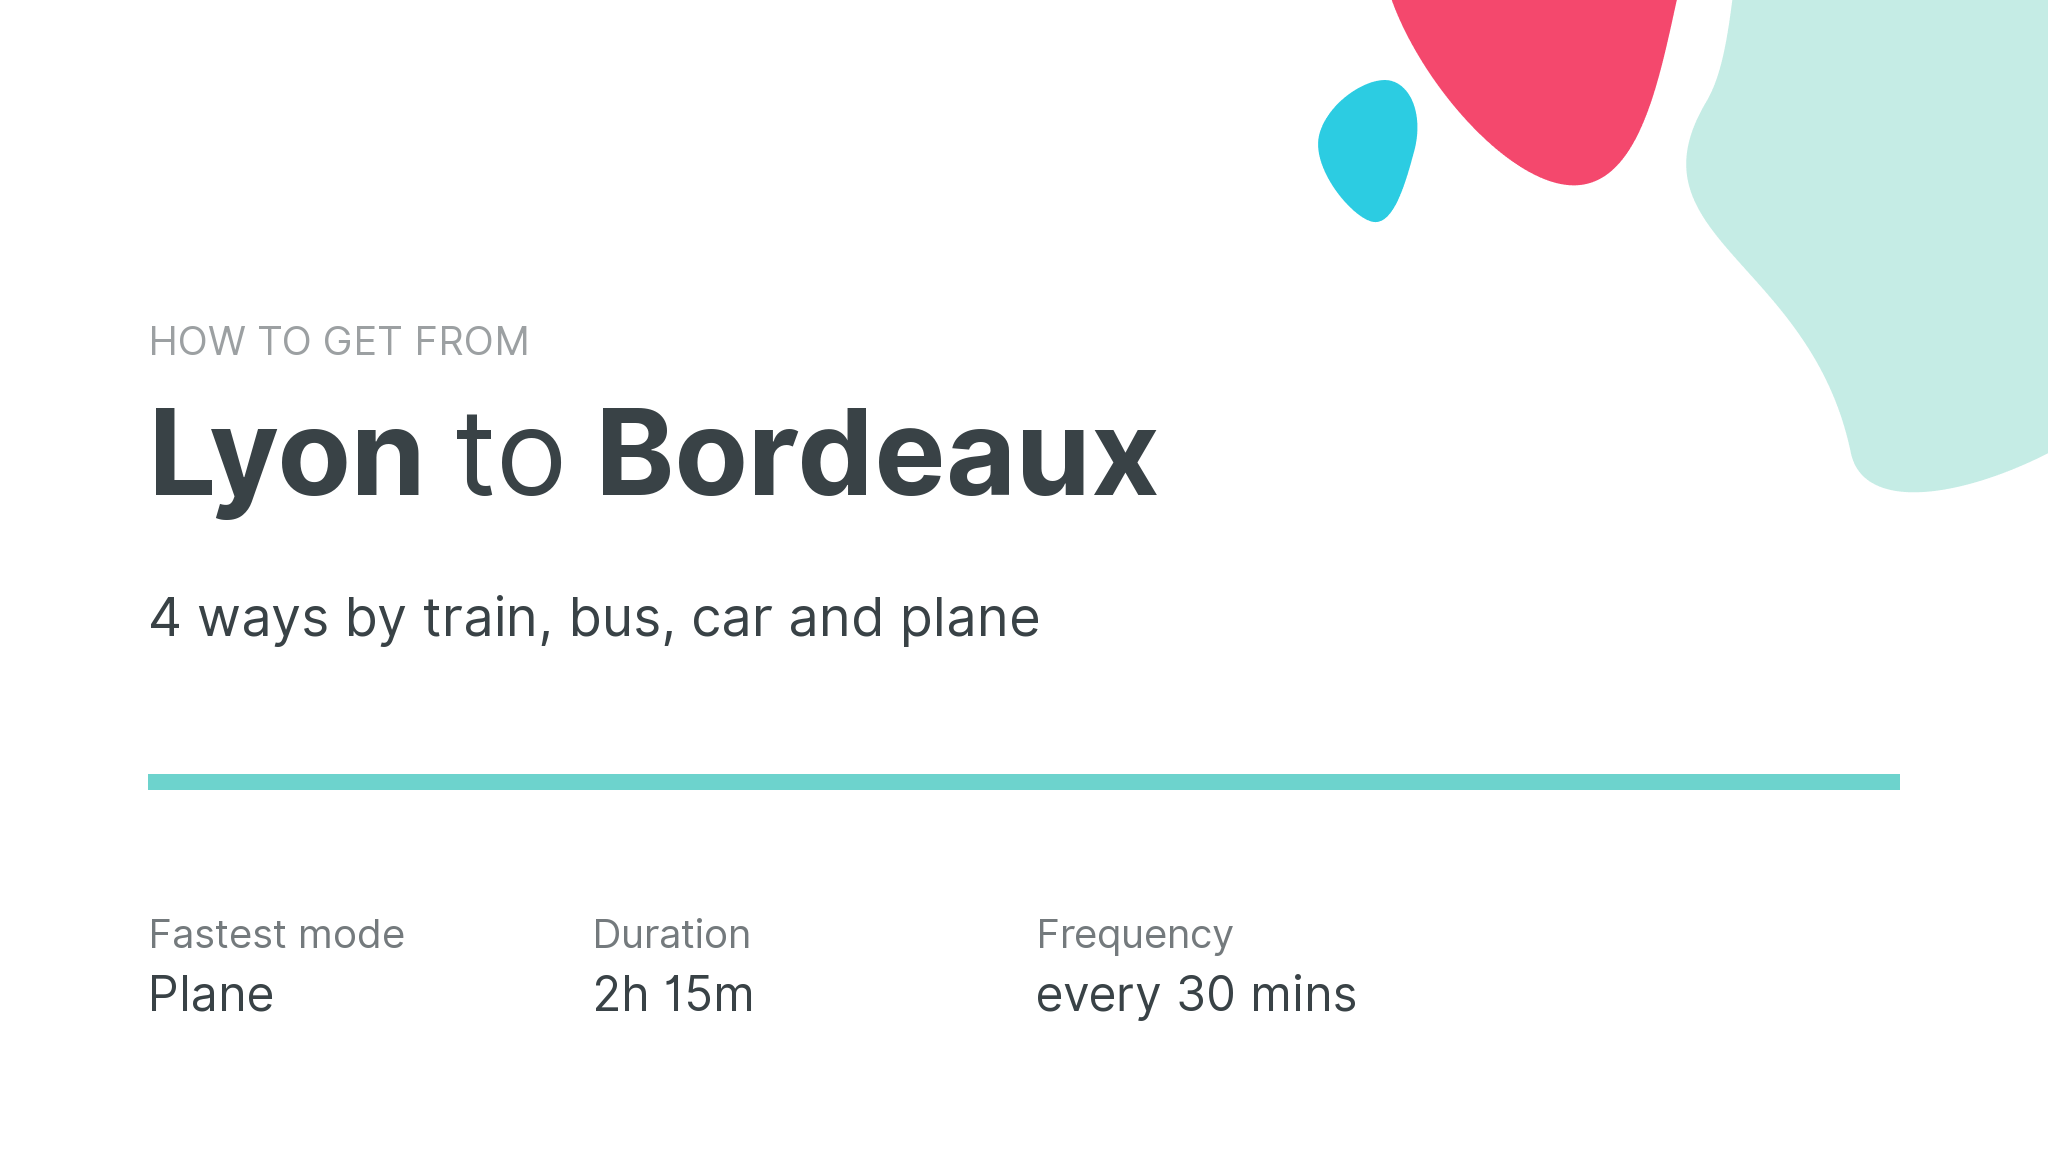 How do I get from Lyon to Bordeaux